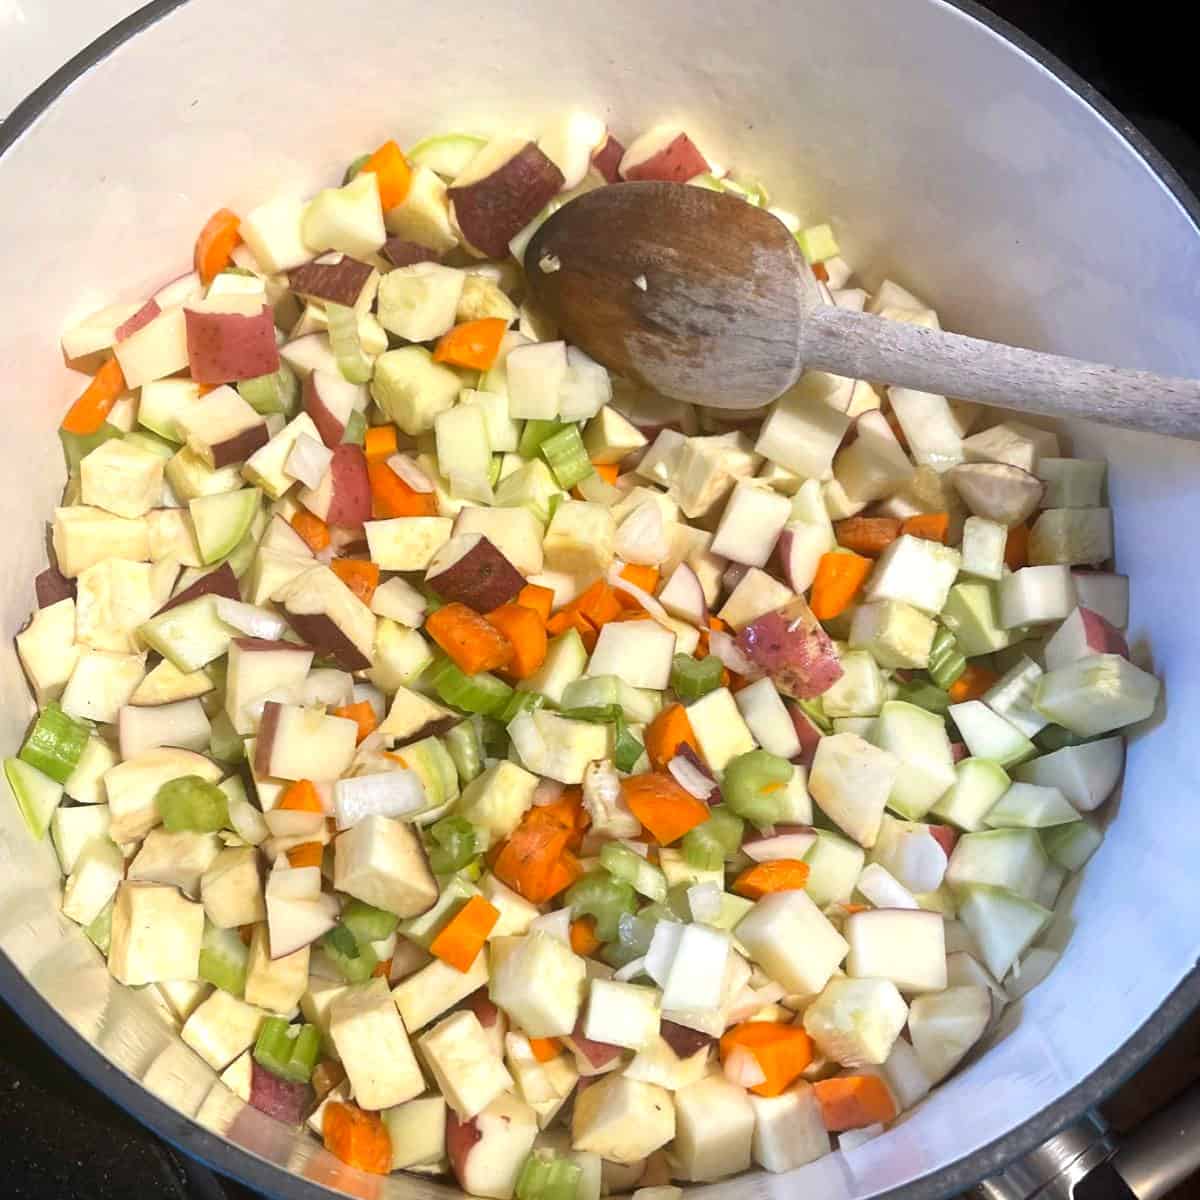 Veggies cooking in dutch oven for mixed veg stew.